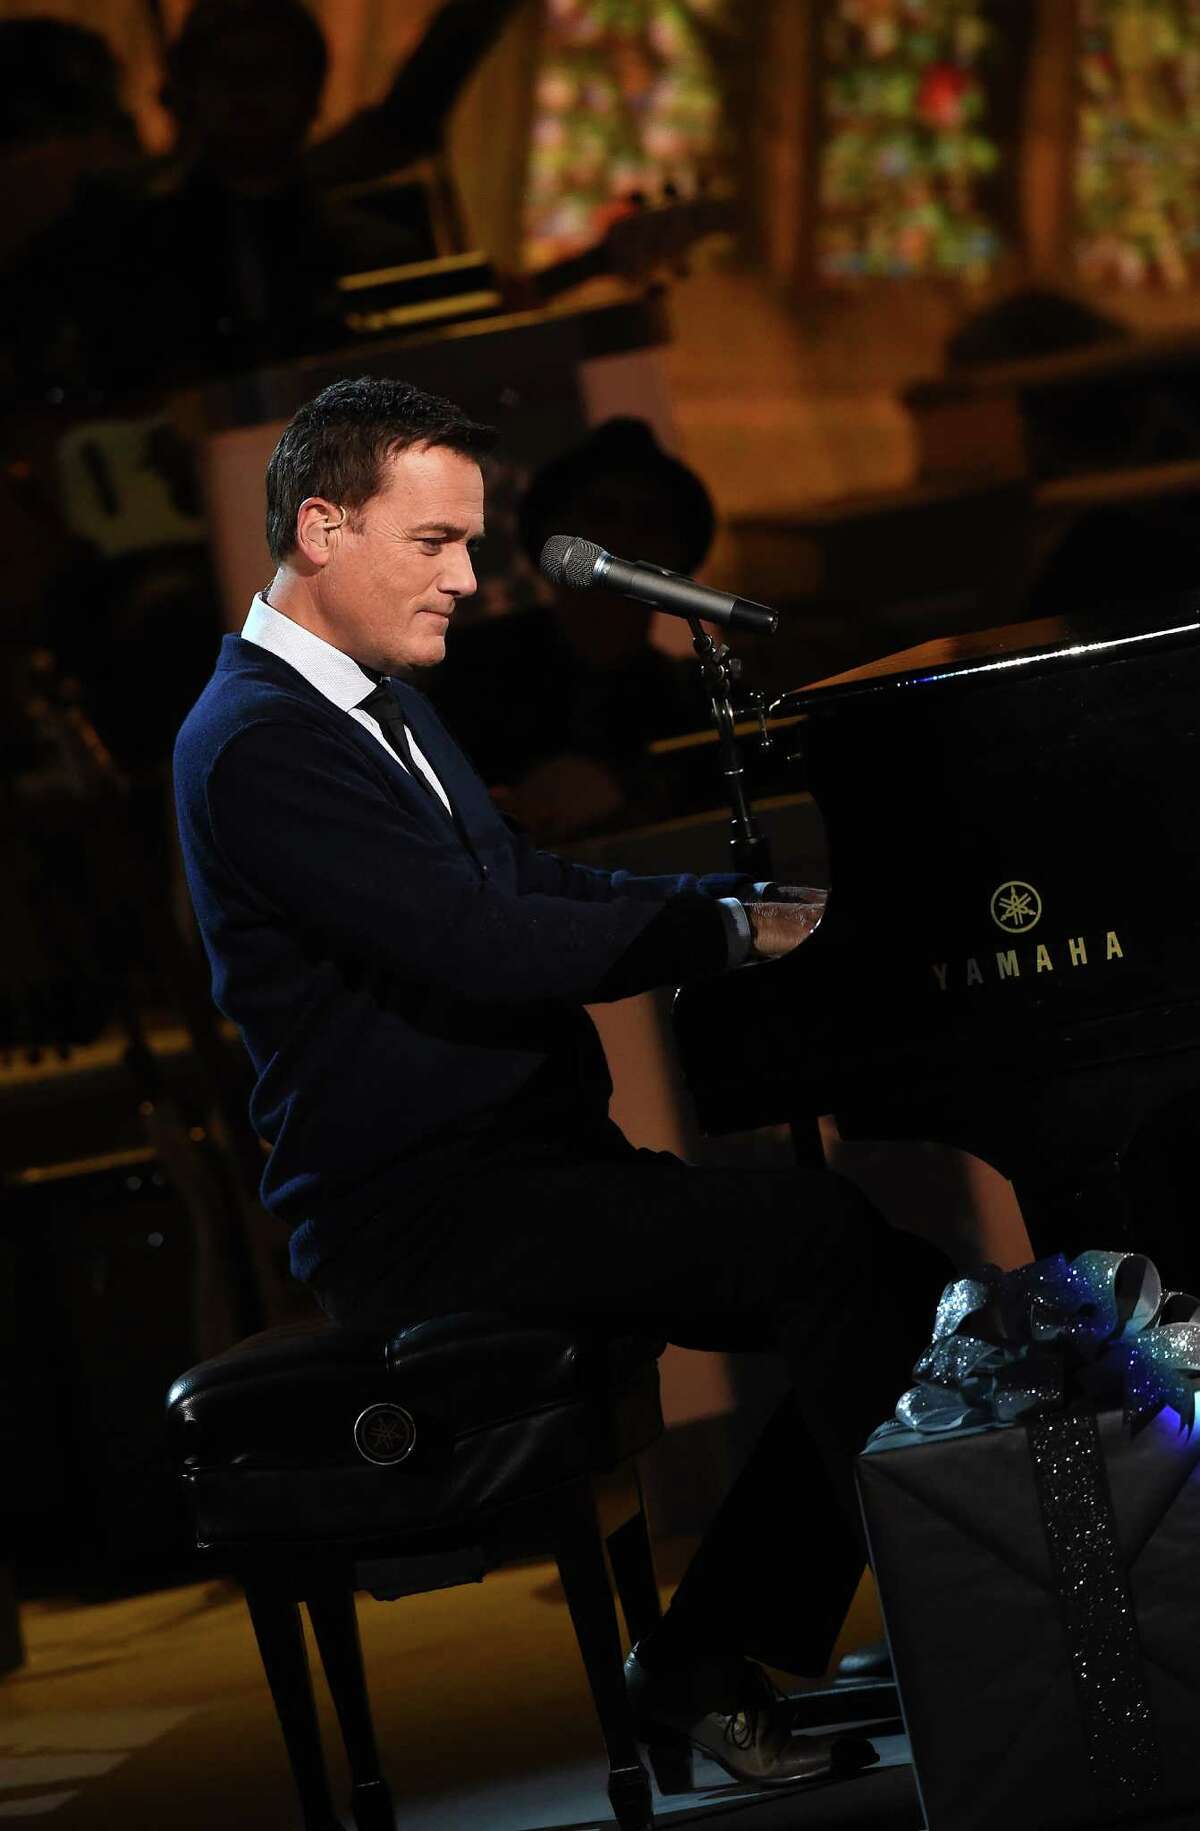 Michael W. Smith will perform a Christmas concert with a live symphony orchestra at the Cynthia Woods Mitchell Pavilion in The Woodlands.